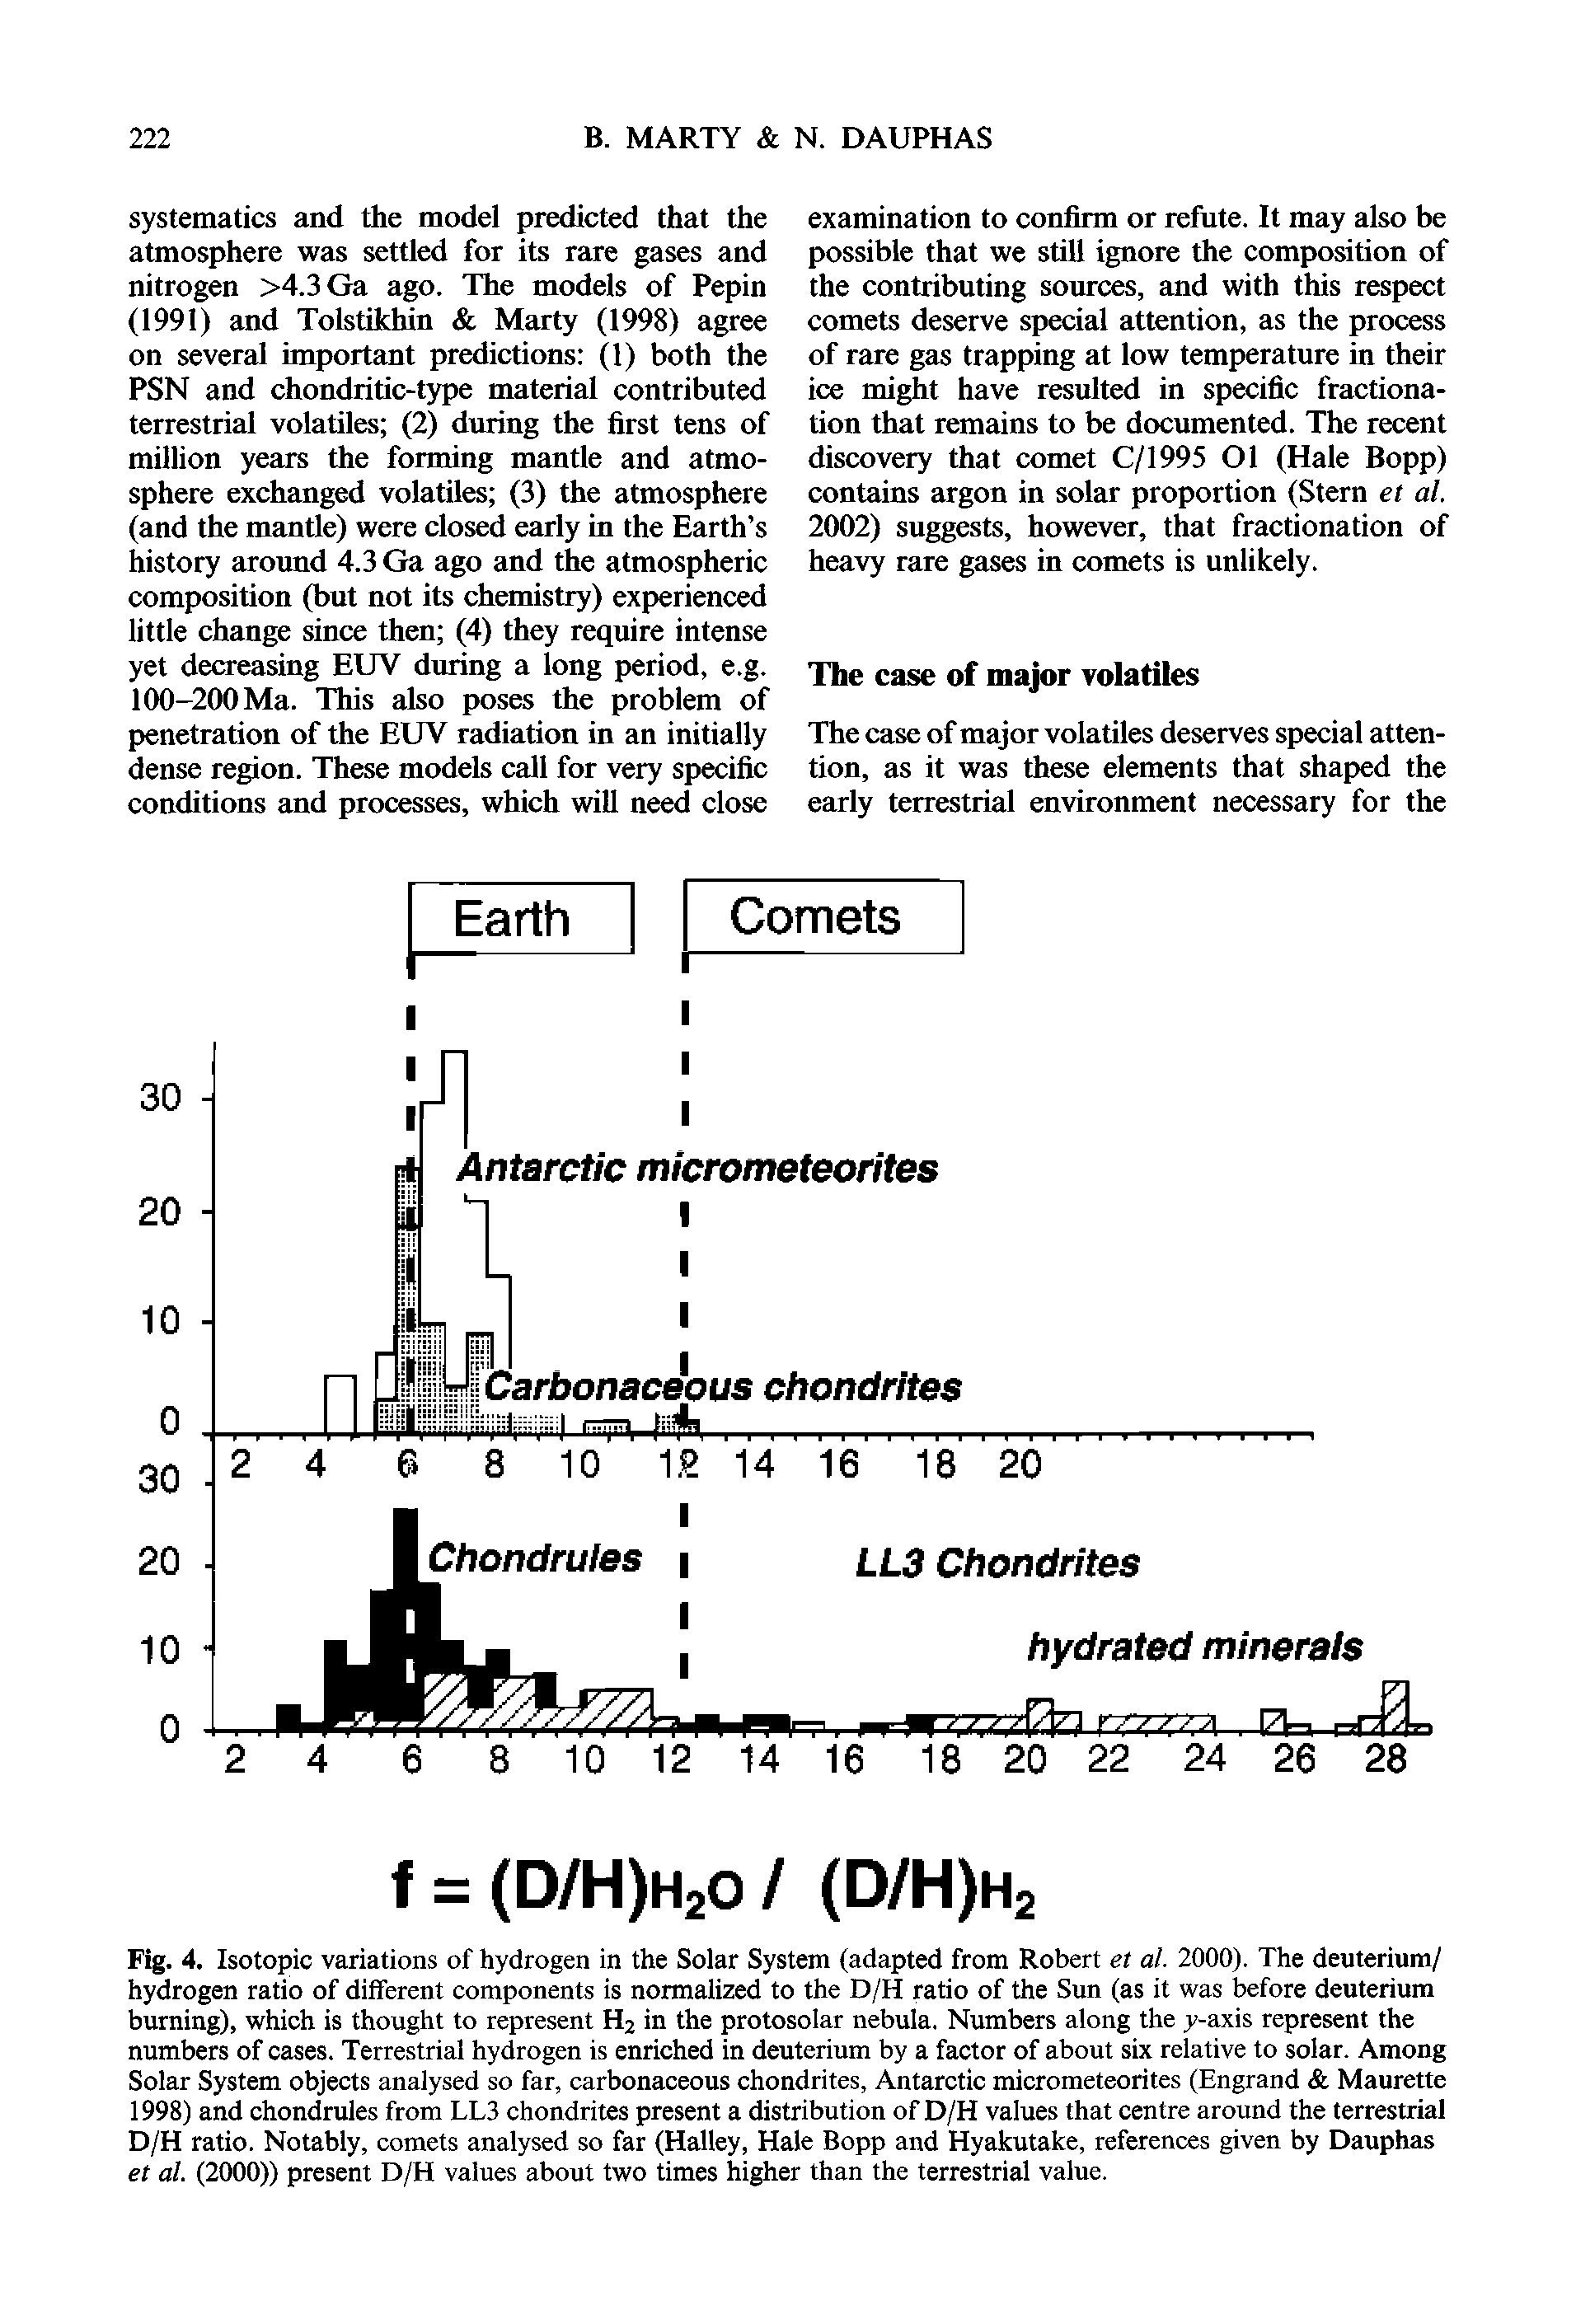 Fig. 4. Isotopic variations of hydrogen in the Solar System (adapted from Robert et al. 2000). The deuterium/ hydrogen ratio of different components is normalized to the D/H ratio of the Sun (as it was before deuterium burning), which is thought to represent H2 in the protosolar nebula. Numbers along the y-axis represent the numbers of cases. Terrestrial hydrogen is enriched in deuterium by a factor of about six relative to solar. Among Solar System objects analysed so far, carbonaceous chondrites, Antarctic micrometeorites (Engrand Maurette 1998) and chondruies from LL3 chondrites present a distribution of D/H values that centre around the terrestrial D/H ratio. Notably, comets analysed so far (Halley, Hale Bopp and Hyakutake, references given by Dauphas et al. (2000)) present D/H values about two times higher than the terrestrial value.